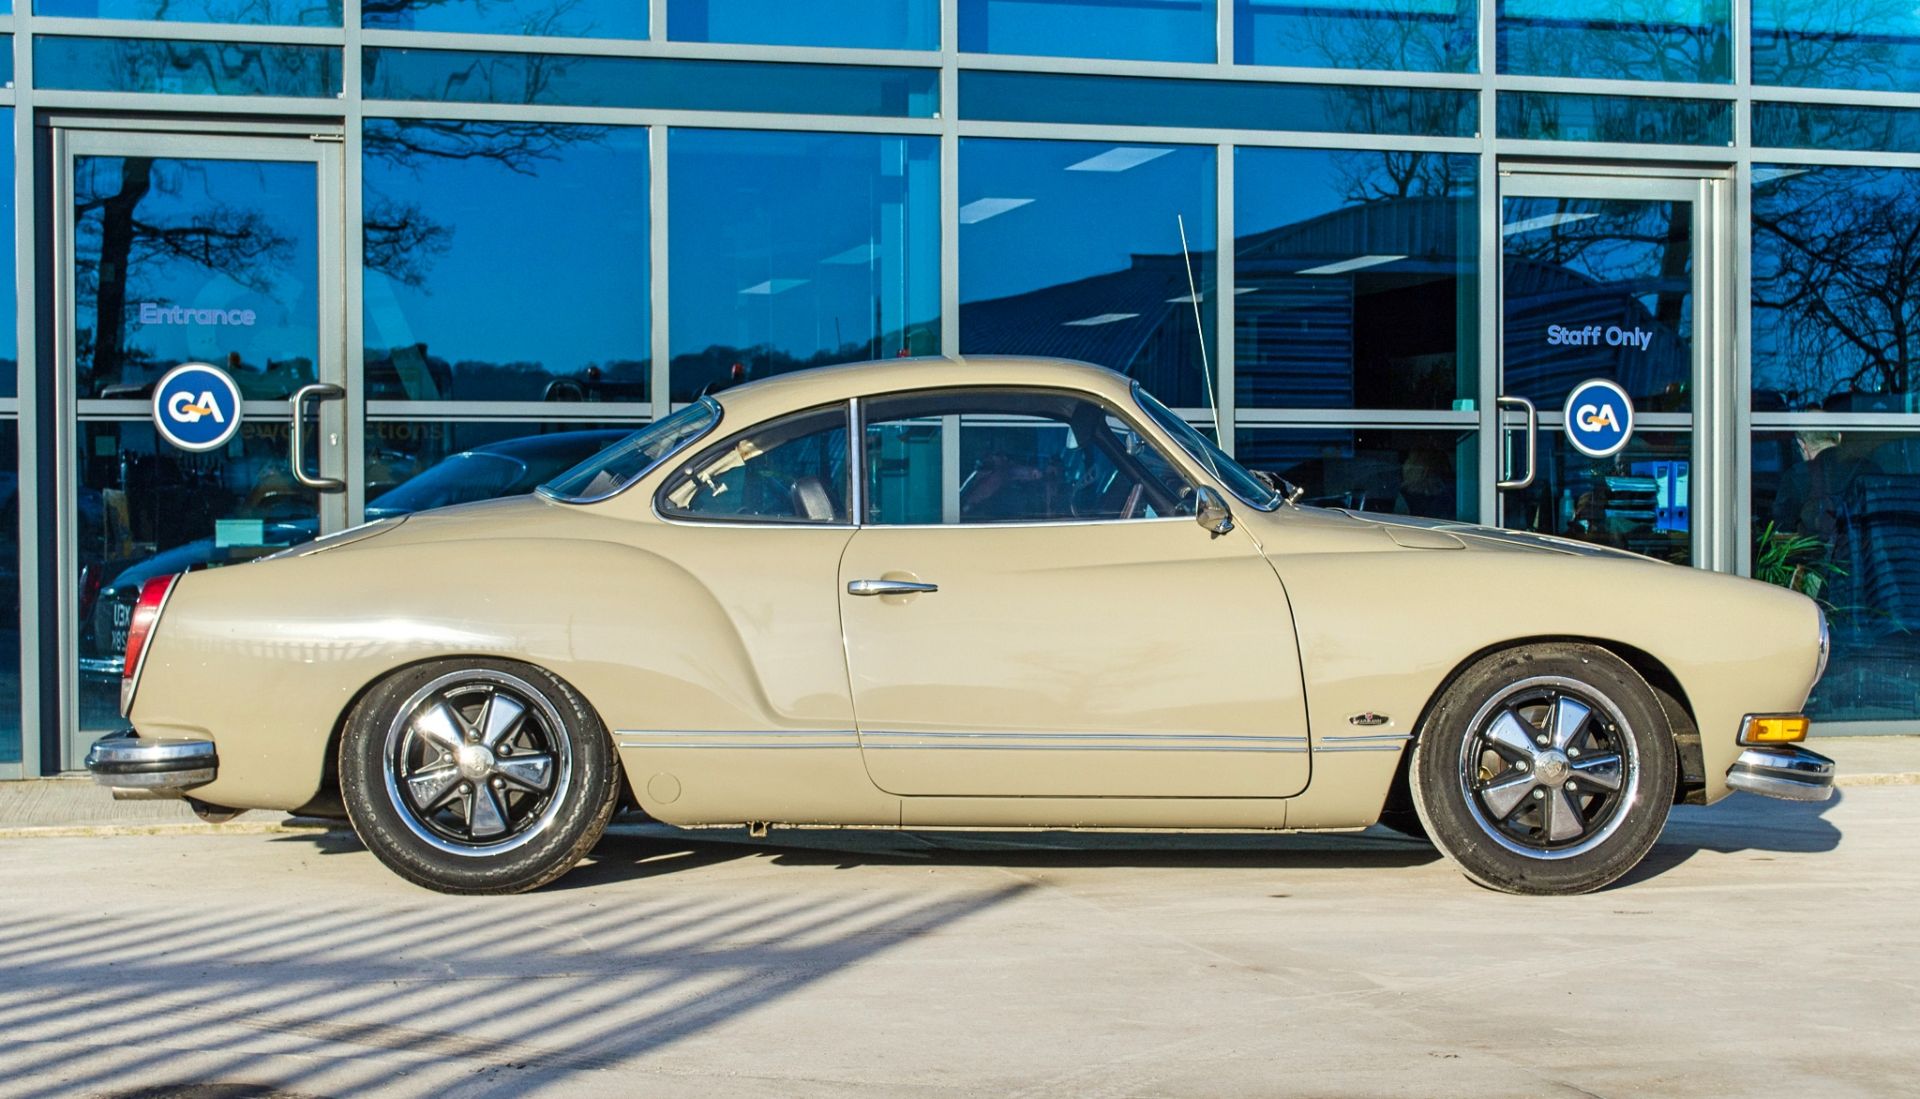 1972 Volkswagen Karmann Ghia 1641cc two door coupe - Image 13 of 52